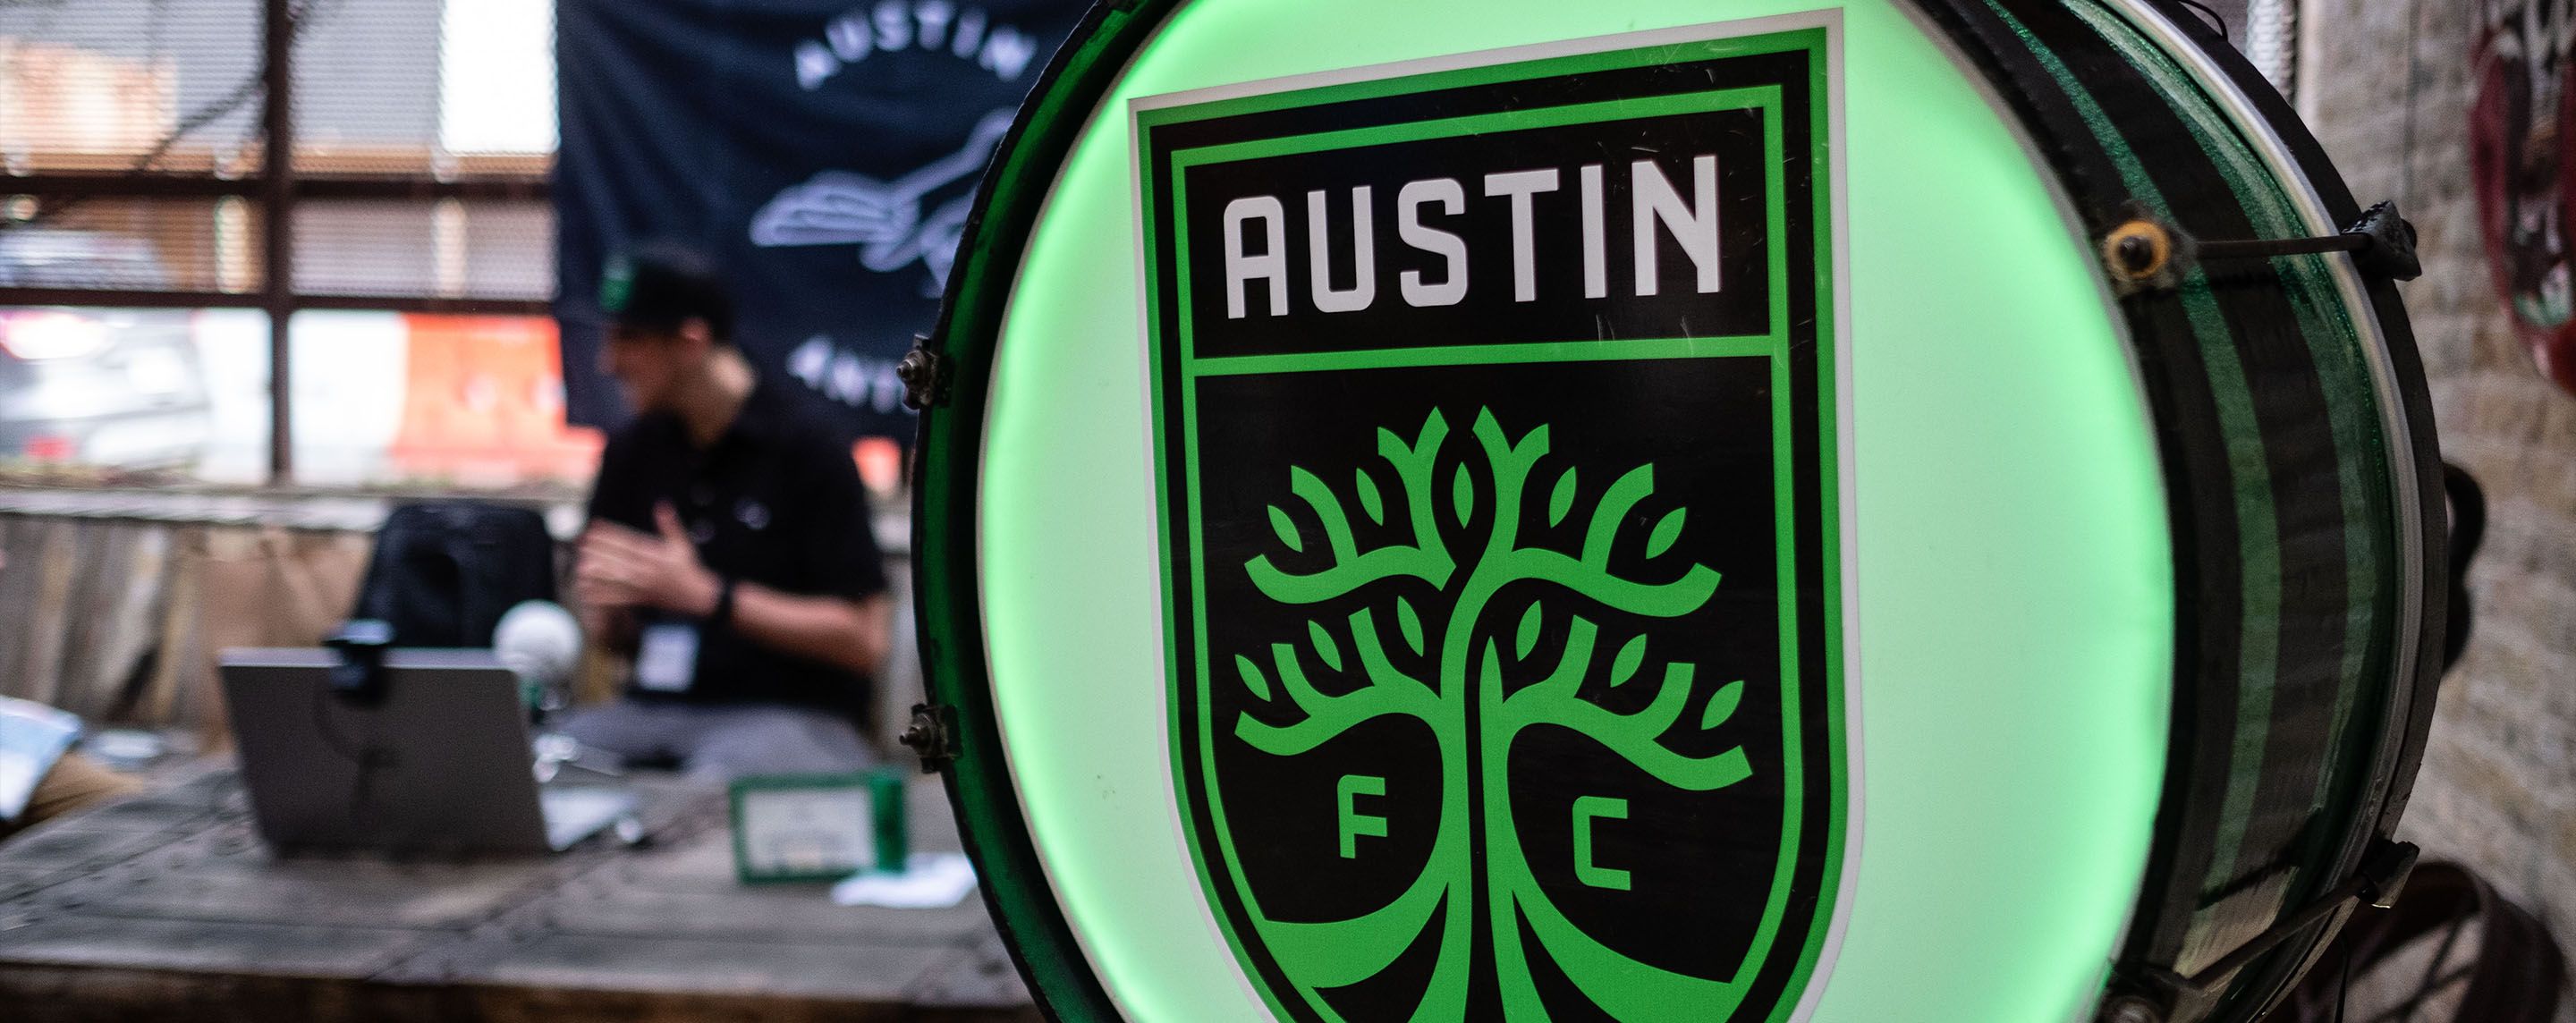 Media: Podcast, Videos, Audio, Wallpaper, Profile Pics, and Background. Anthem: The Supporters Group for Austin FC